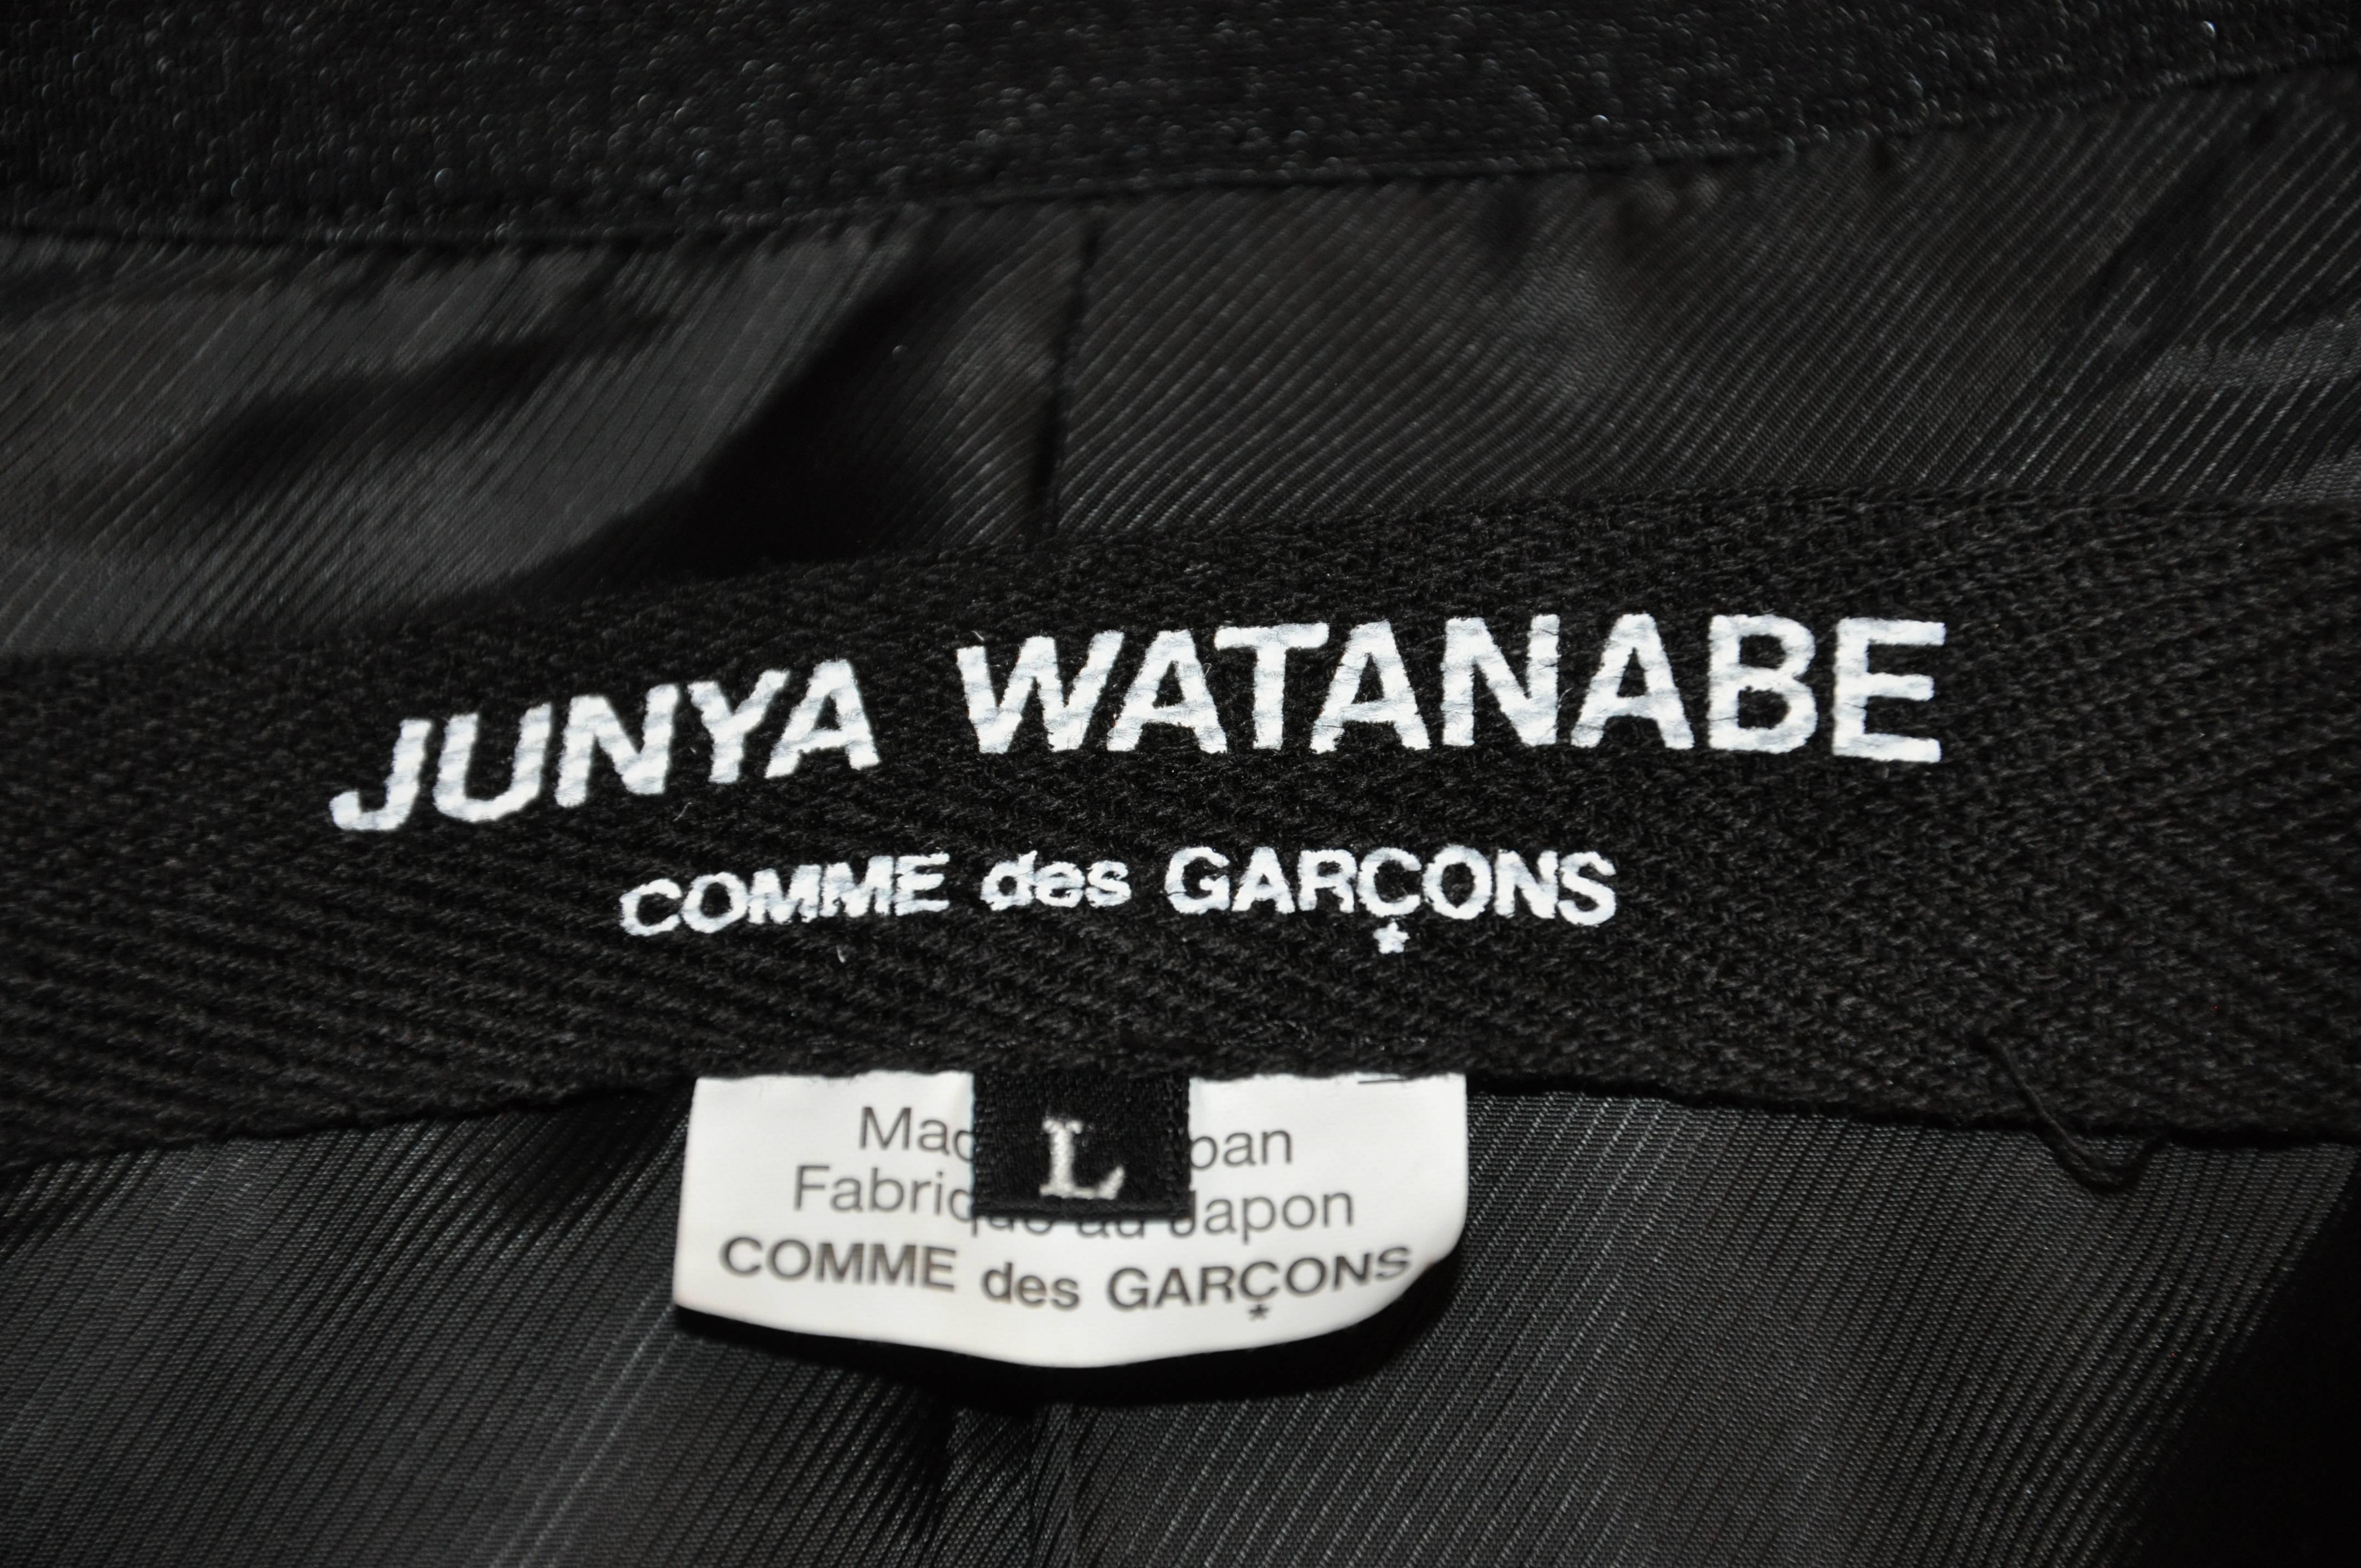       Junya Watanabe 'Comme des Garcons' wonderfully wicked detailed multi-textured black jacket has multi-textured three-front buttons with a hidden button on the lapel, as well as multi-textured three buttons on the cuffs. The multi-textured black